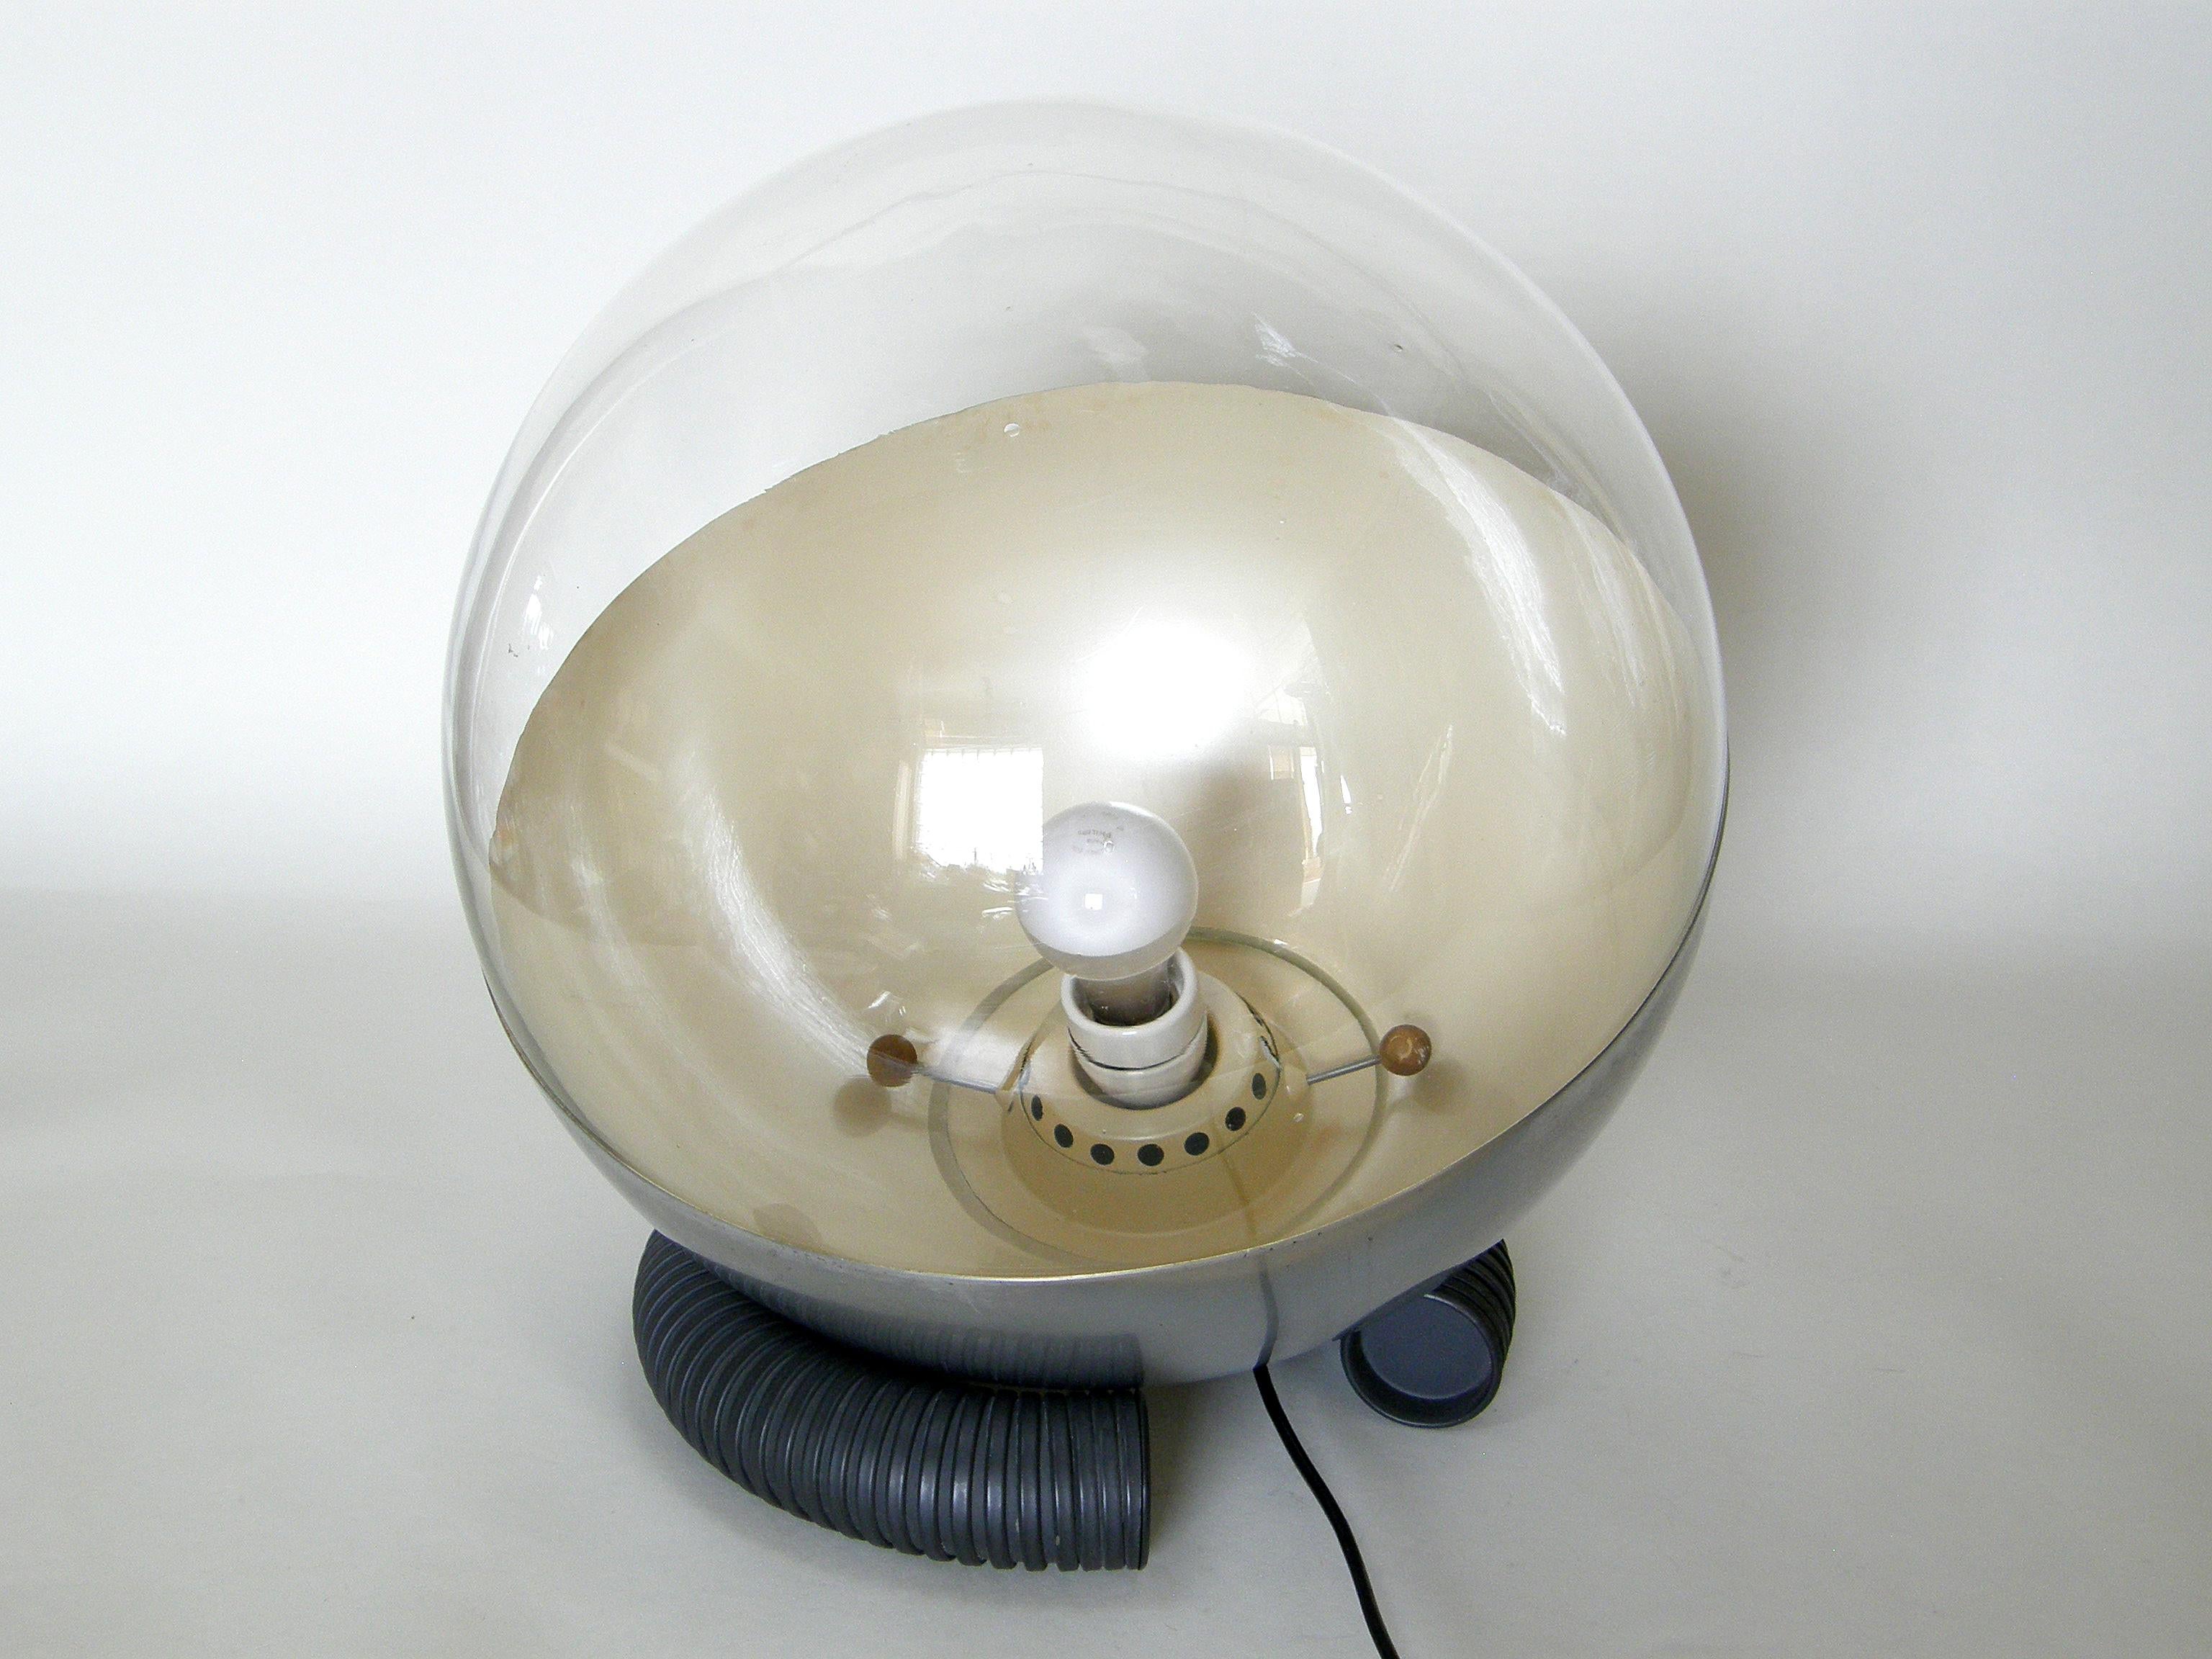 Painted Gino Sarfatti Adjustable Table Lamp for Arteluce Model Number 598, circa 1965